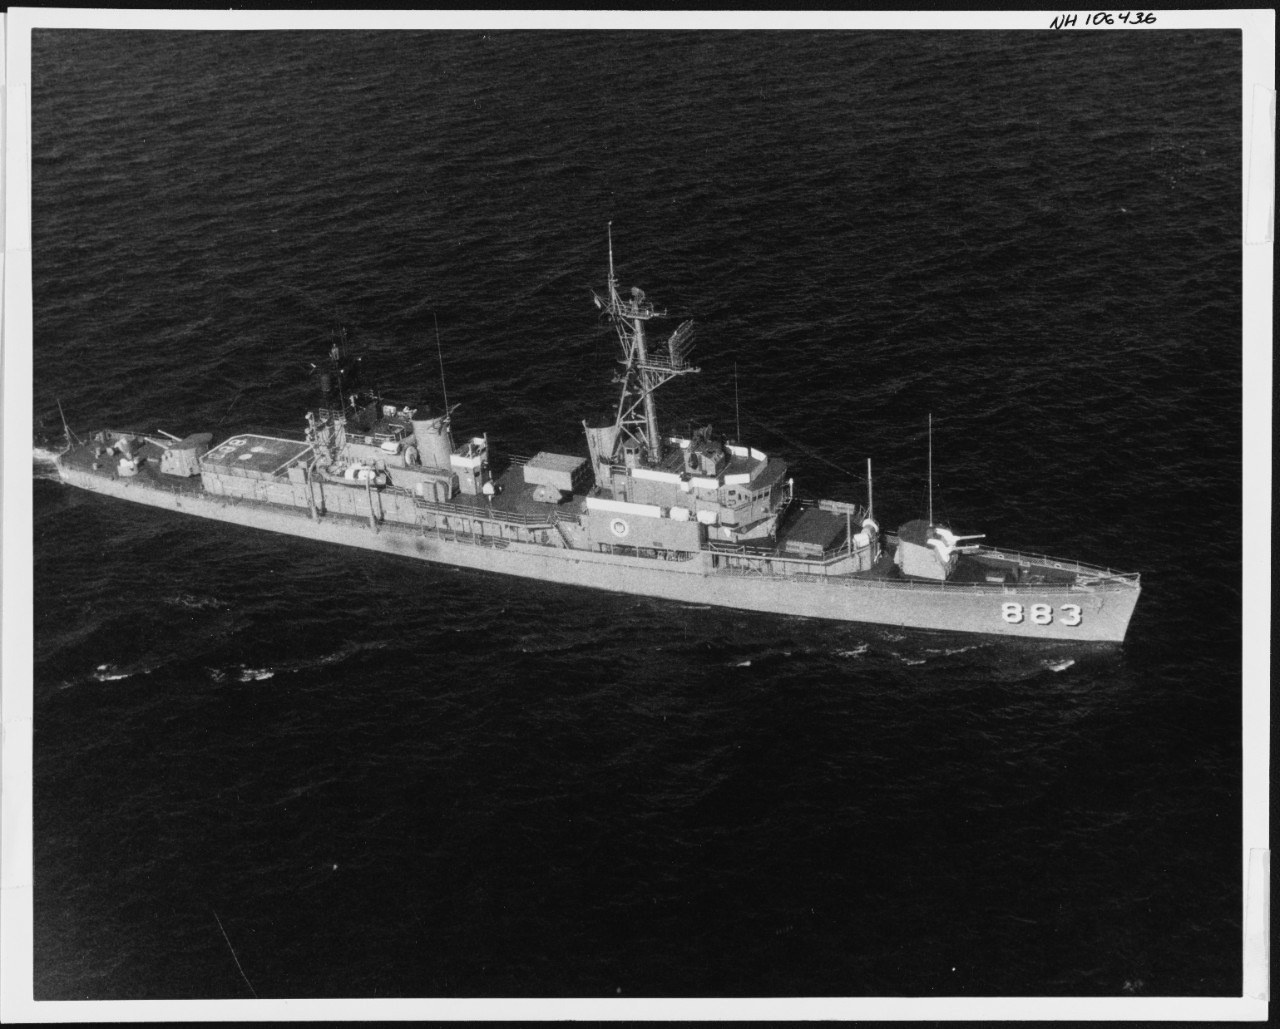 Photo #: NH 106436  USS Newman K. Perry